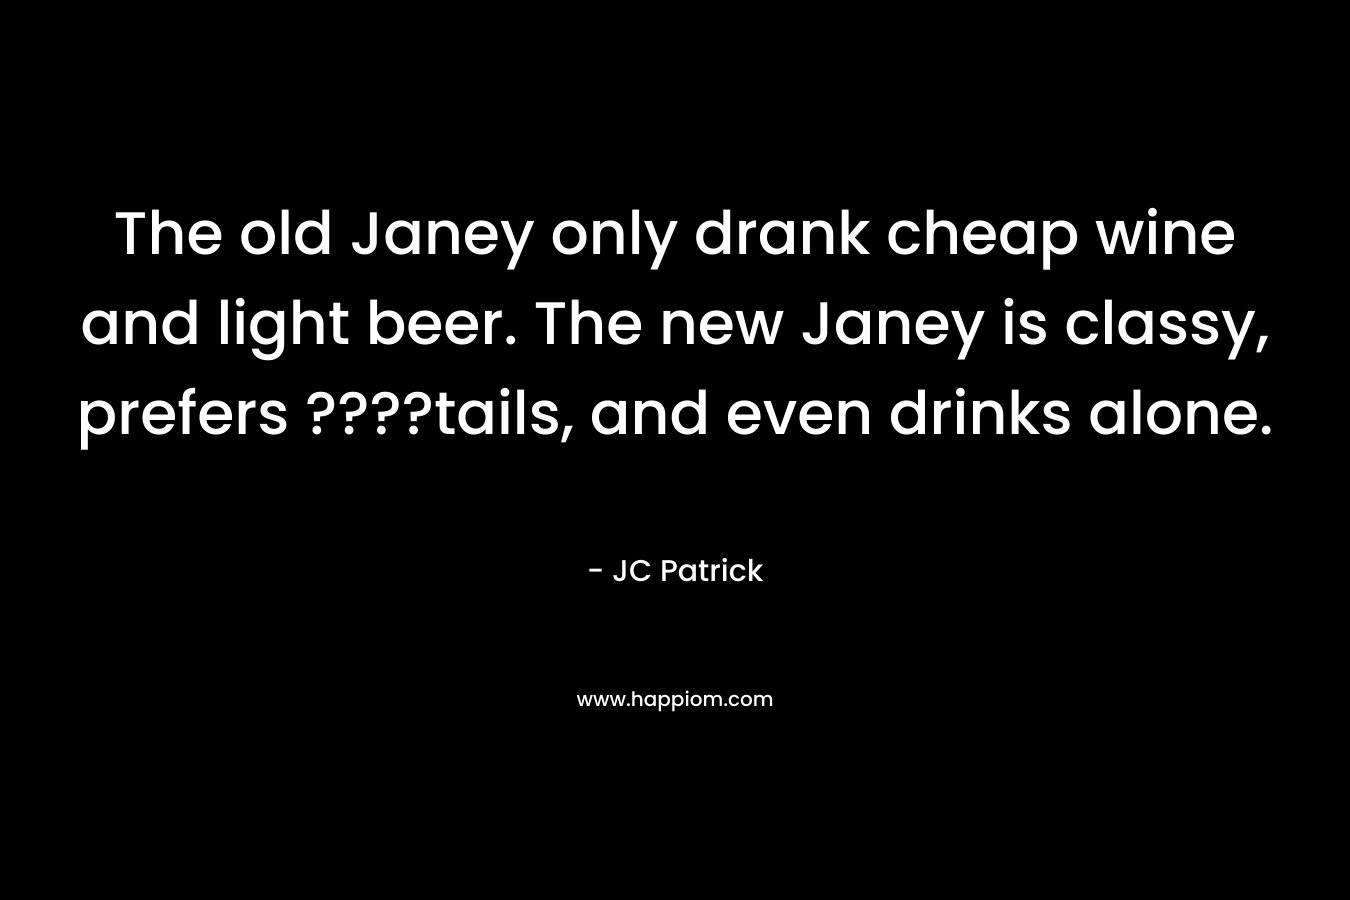 The old Janey only drank cheap wine and light beer. The new Janey is classy, prefers ????tails, and even drinks alone. – JC Patrick